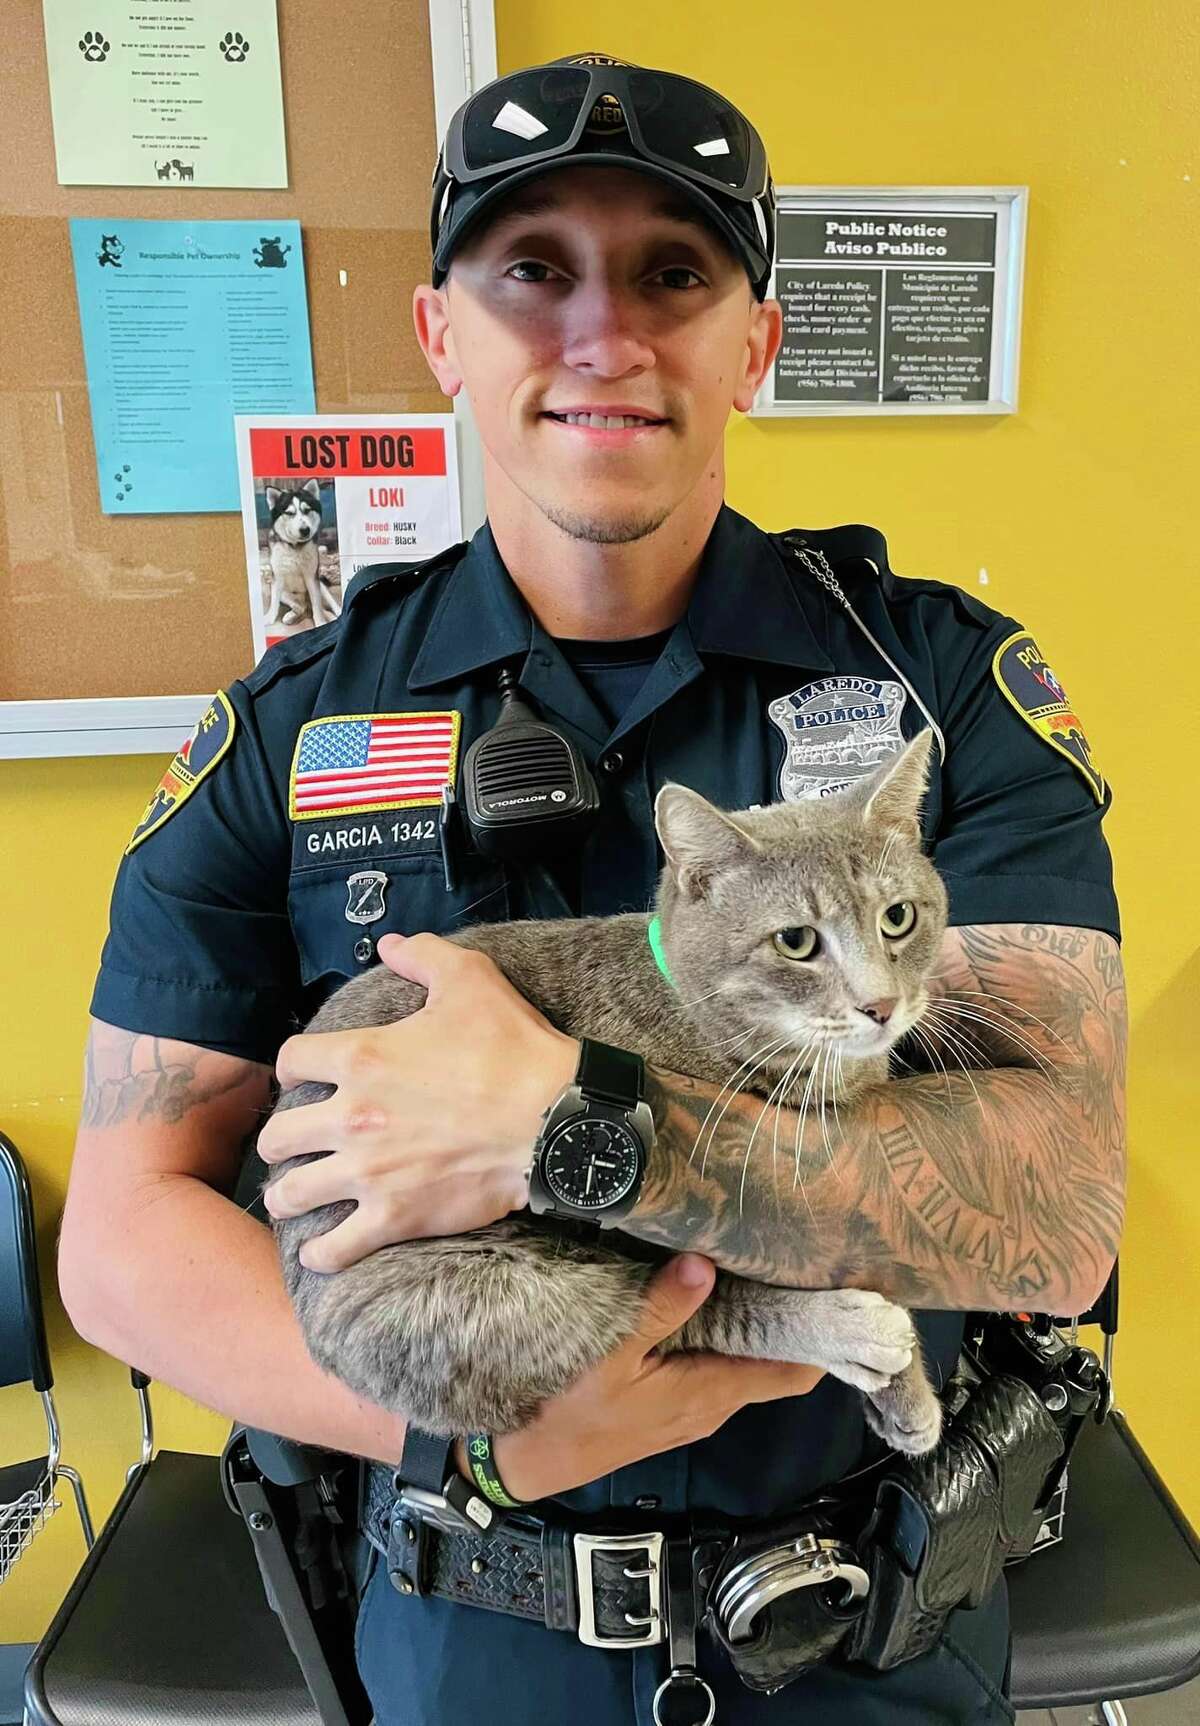 Officer C. Garcia from the Laredo Police Department is pictured with Greyson, a 3-year-old cat up for adoption through Laredo Animal Care Services.